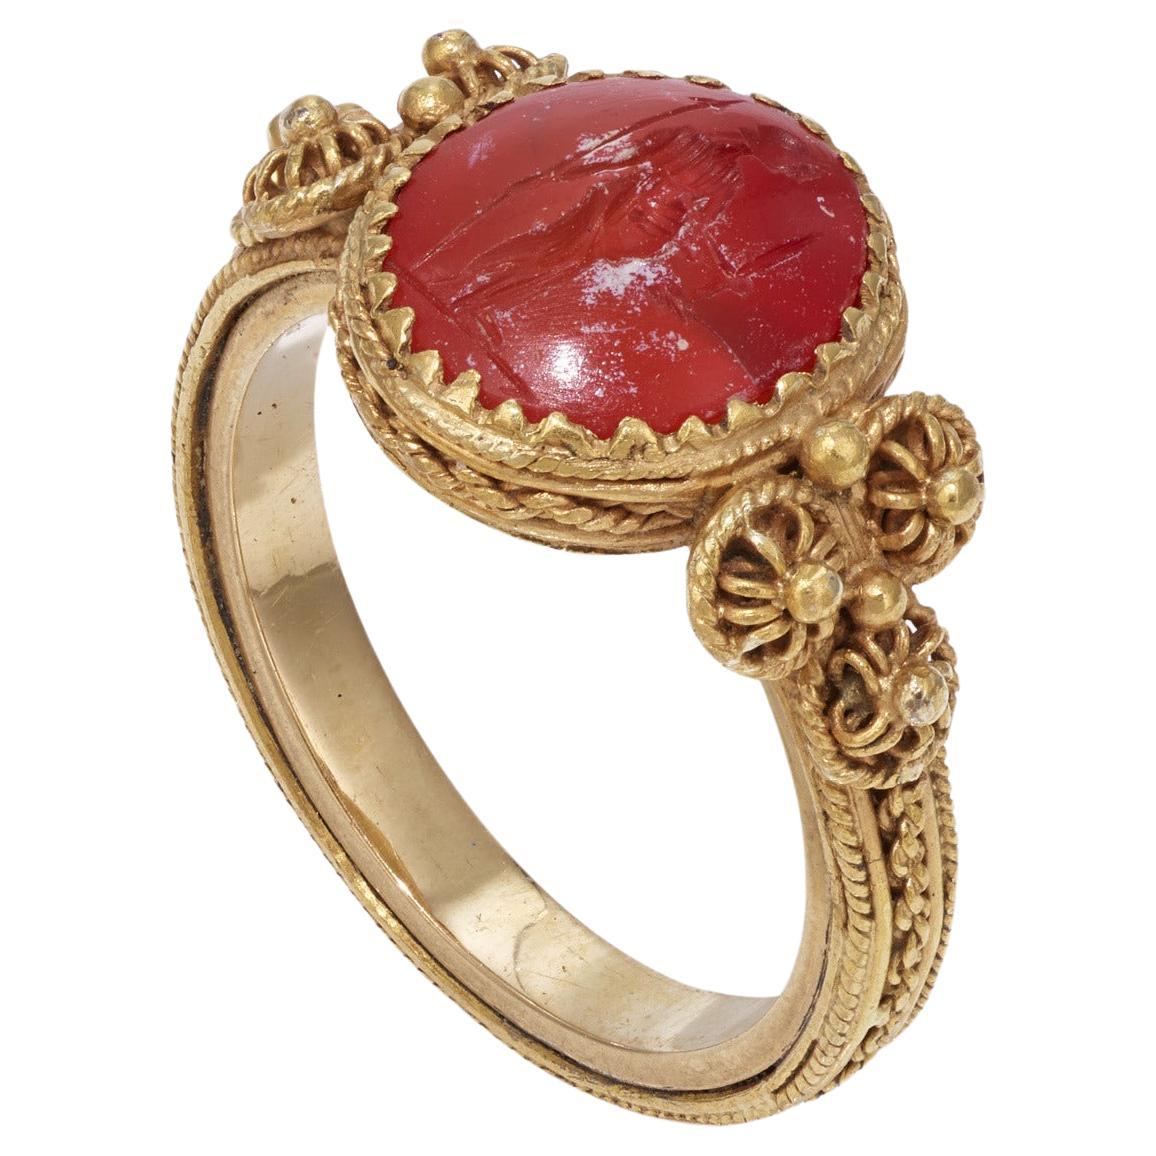 Uncut Ancient Roman Gold Ring with Minerva Intaglio 2rd Century AD For Sale